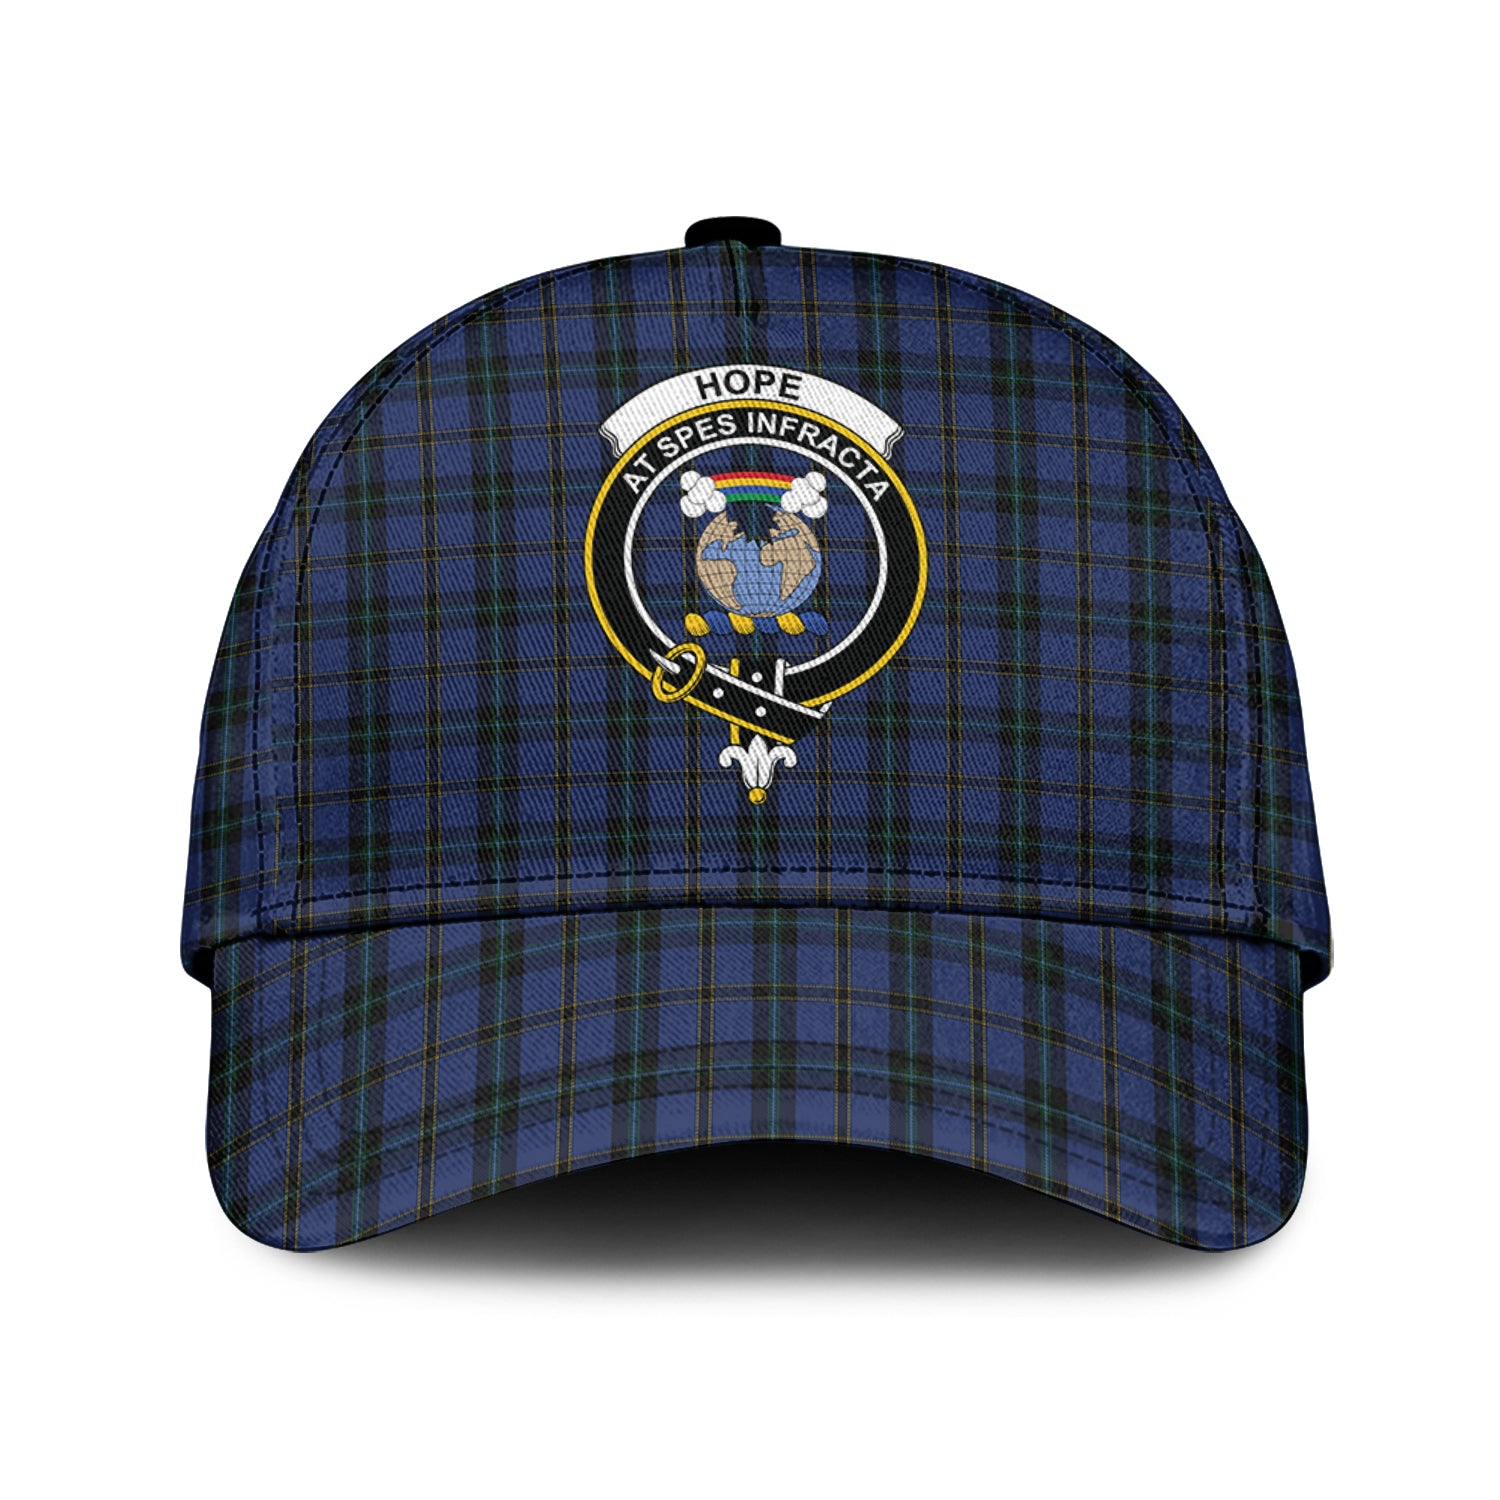 hope-vere-weir-tartan-classic-cap-with-family-crest